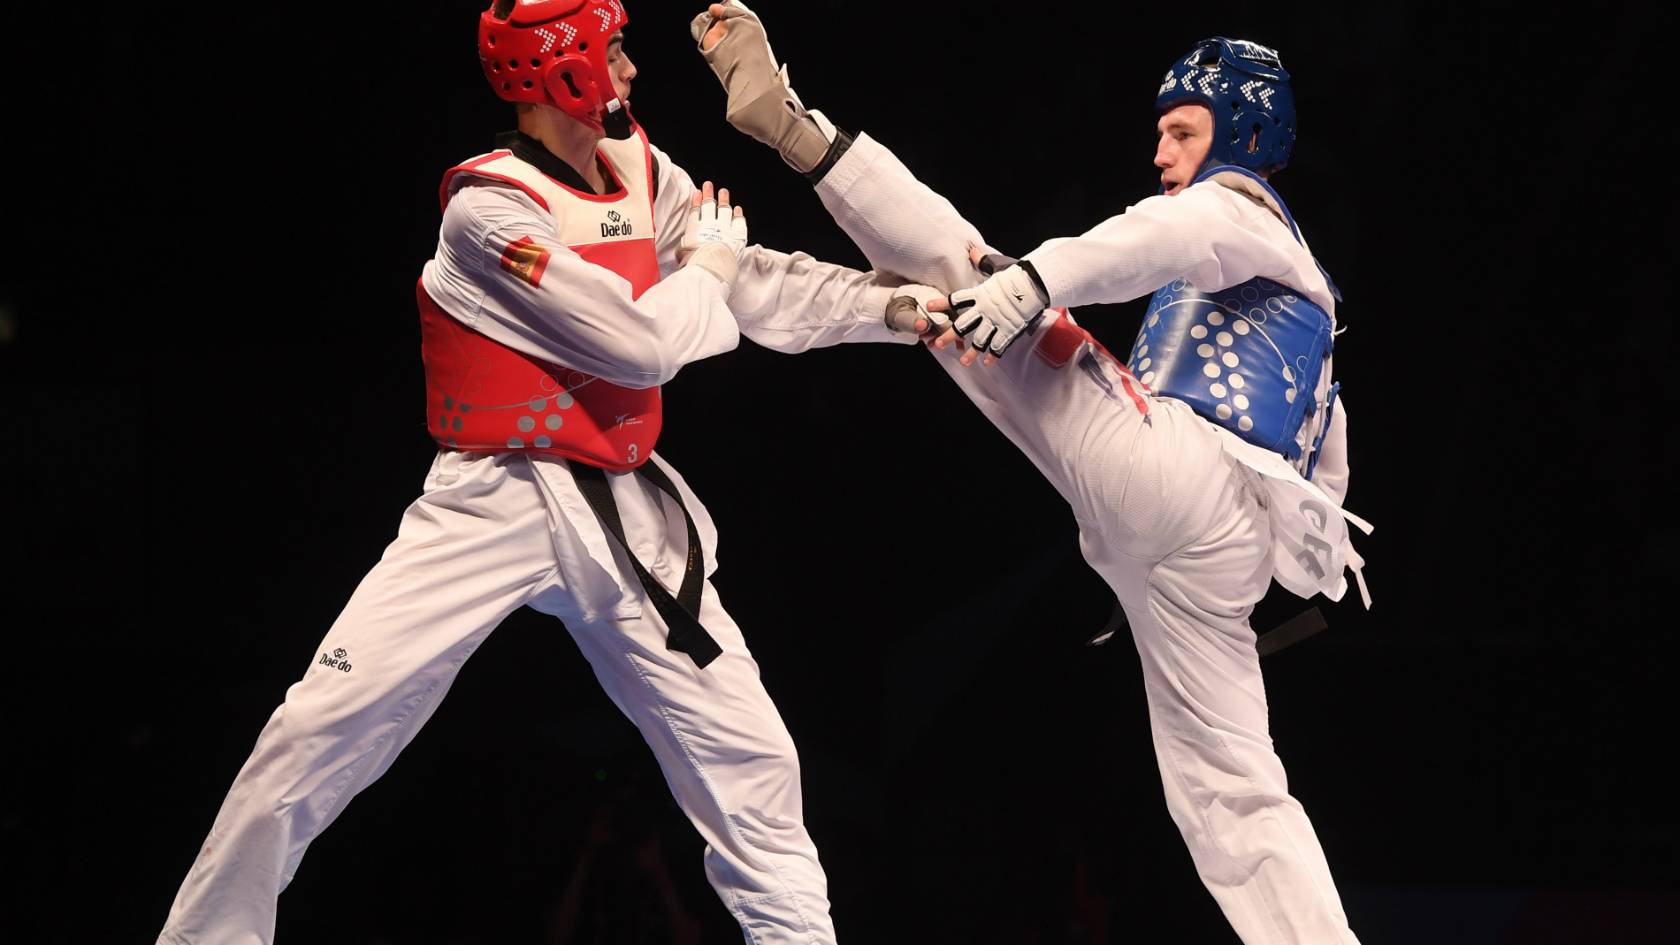 Watch live coverage from the World Taekwondo Grand Prix Final in Moscow